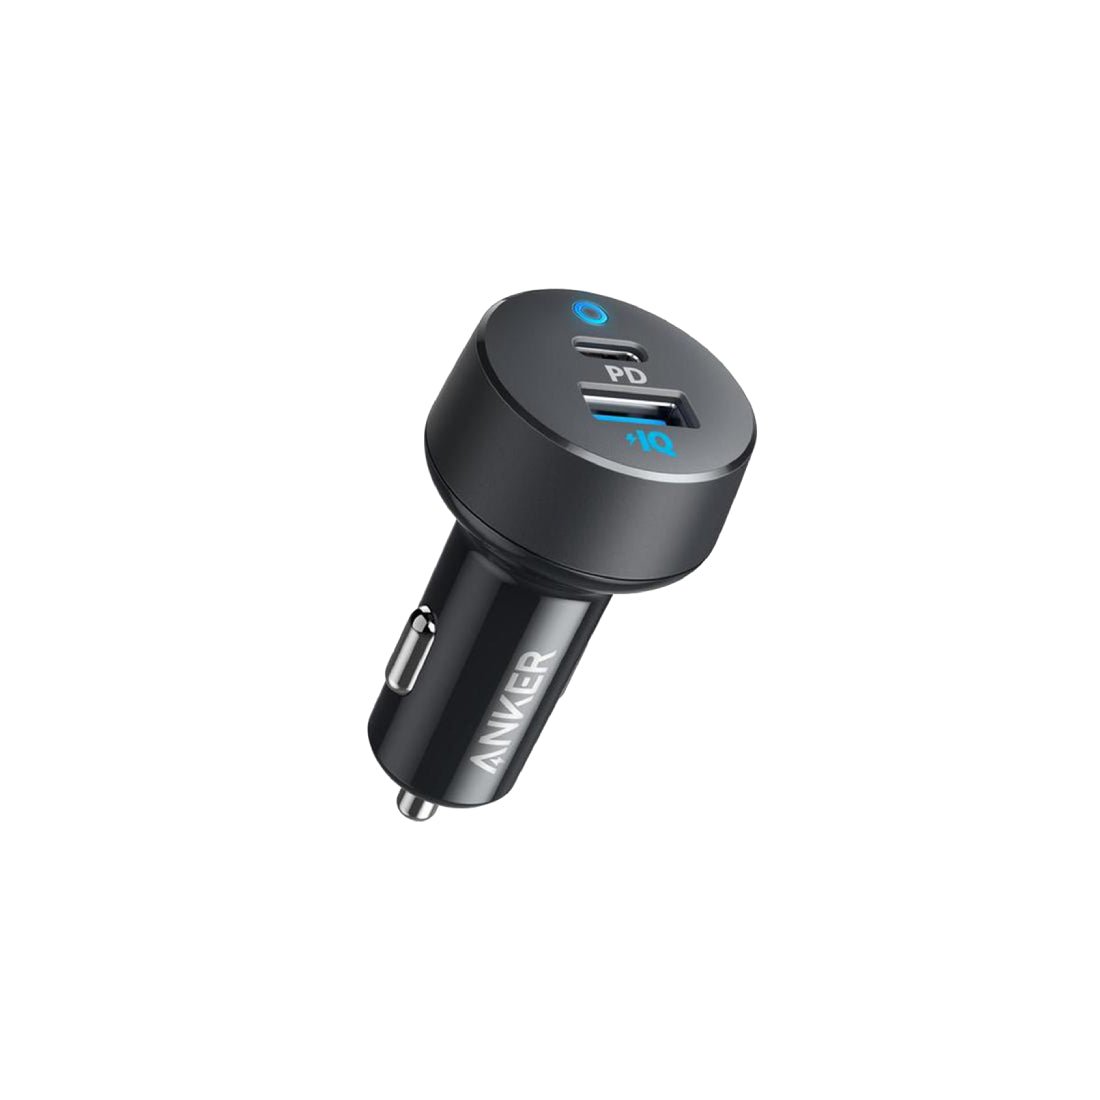 Anker A2732HF1 PowerDrive PD+ 2 35W Car Charger - Grey - شاحن - Store 974 | ستور ٩٧٤